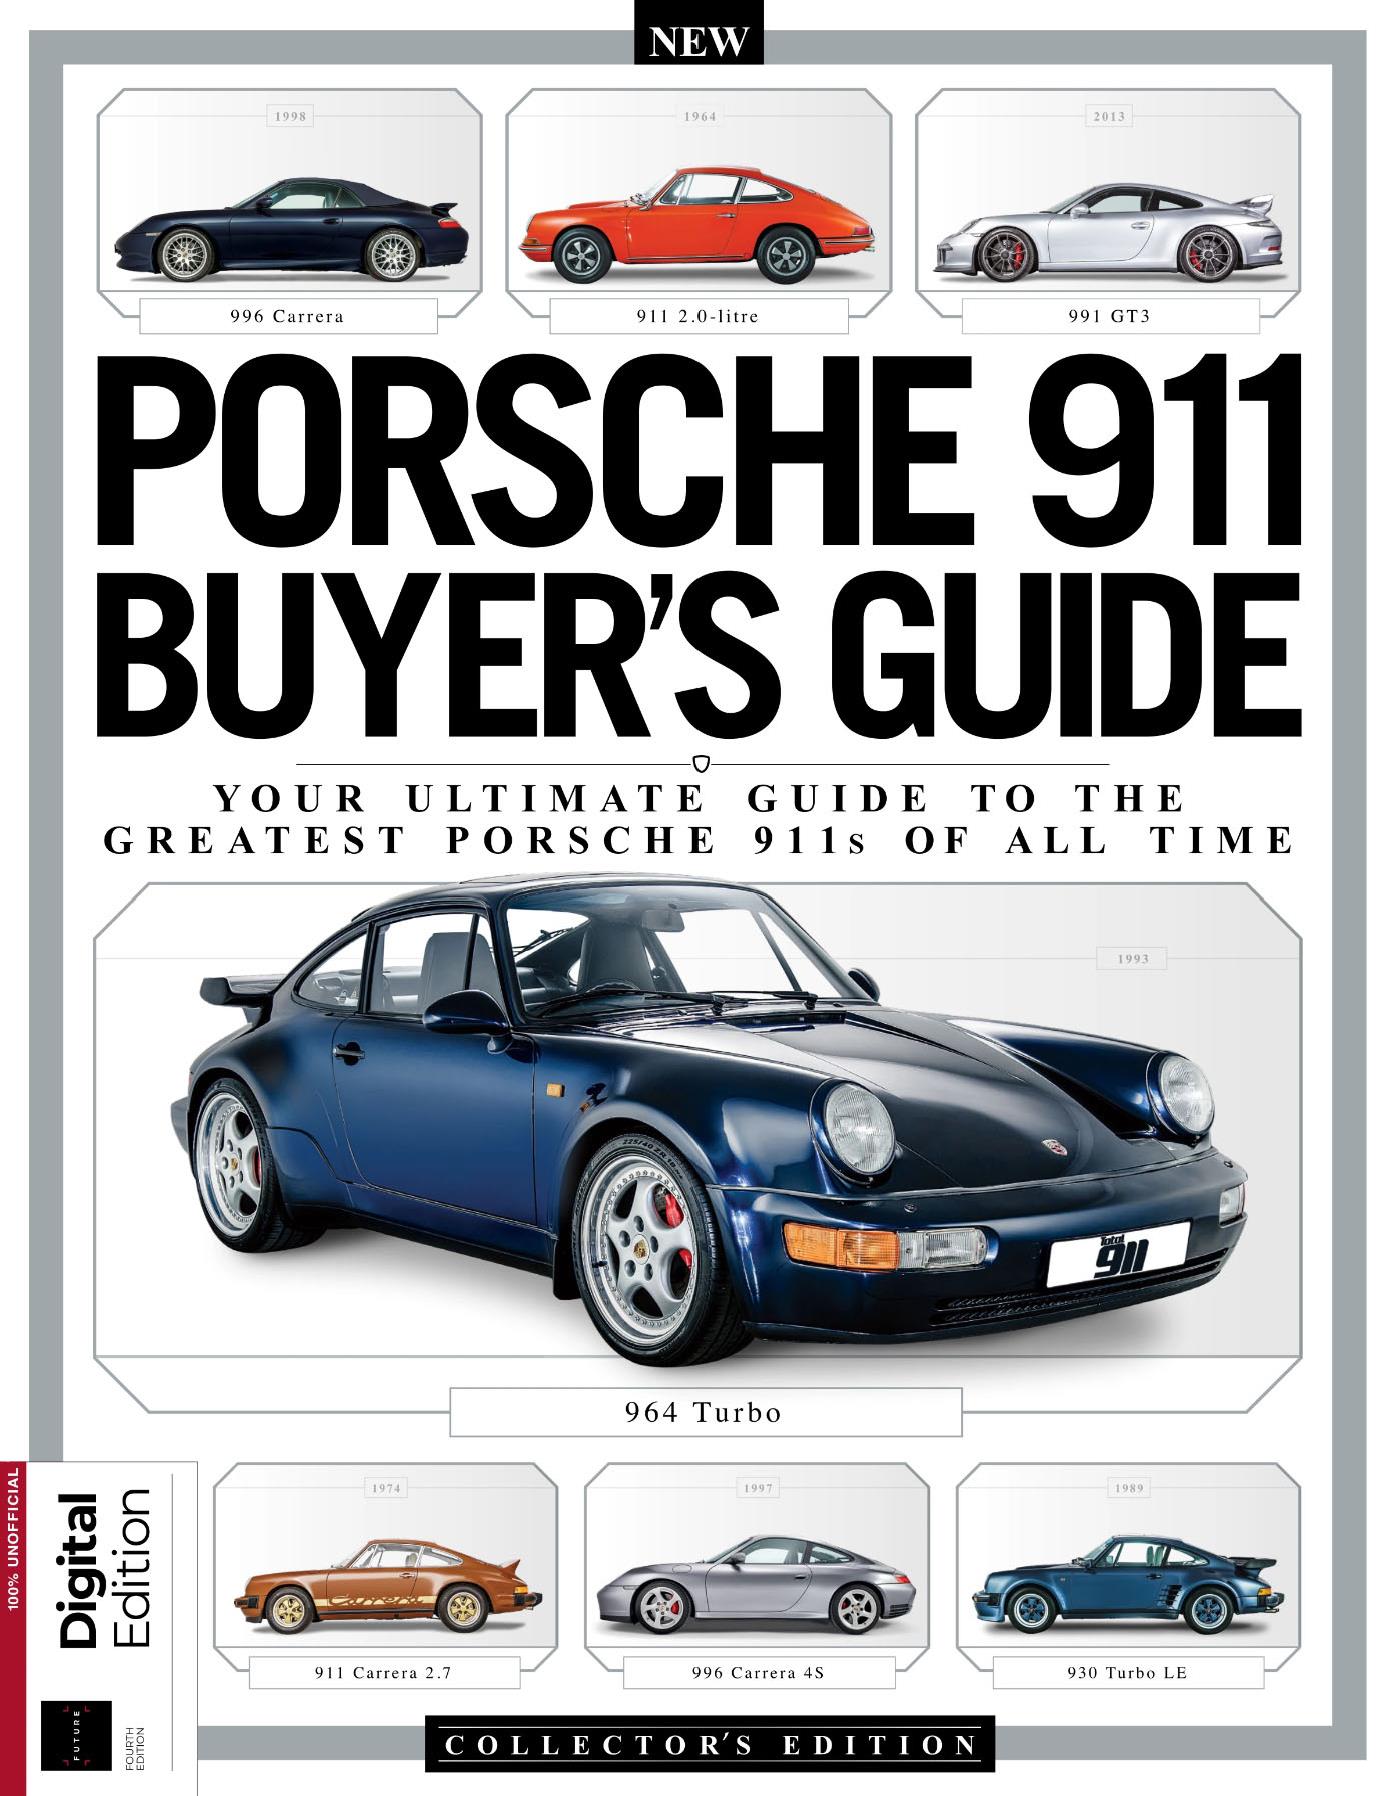 Журнал Porsche 911 Buyers Guide, 4nd Edition (from the publishers of Total 911)